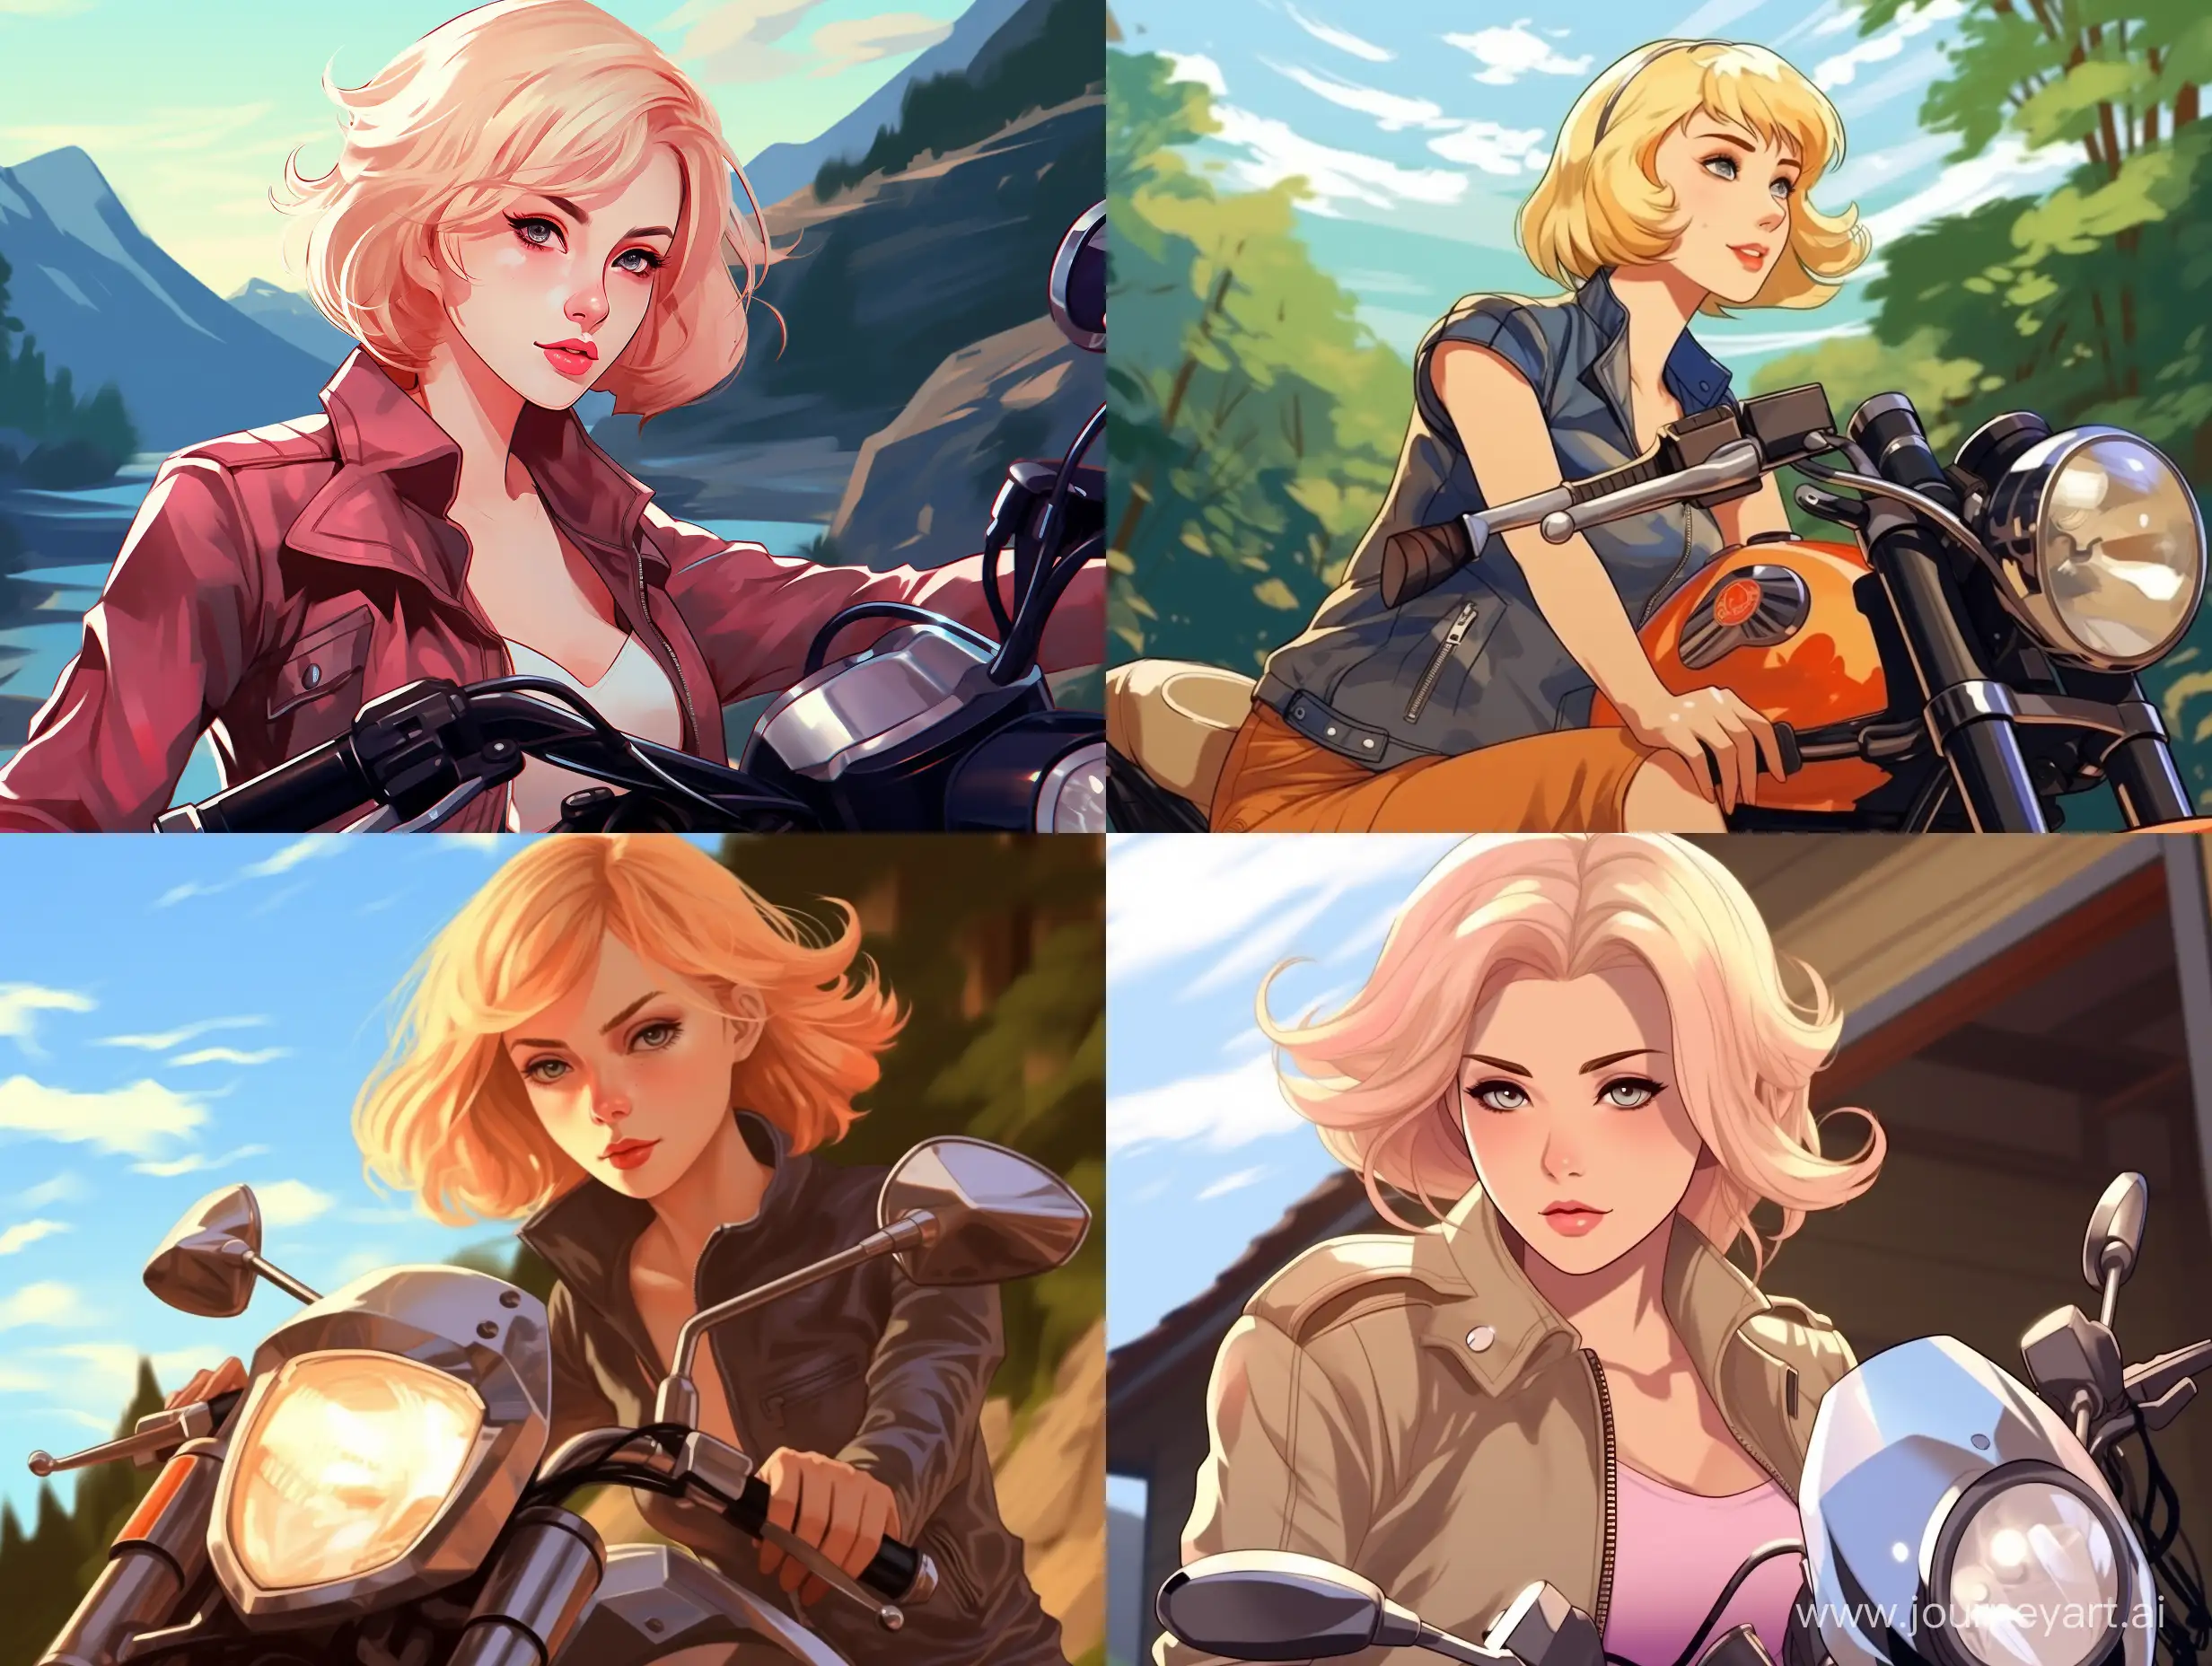 Stylish-Blonde-Riding-a-Sporty-Motorcycle-in-Retro-Anime-Elegance